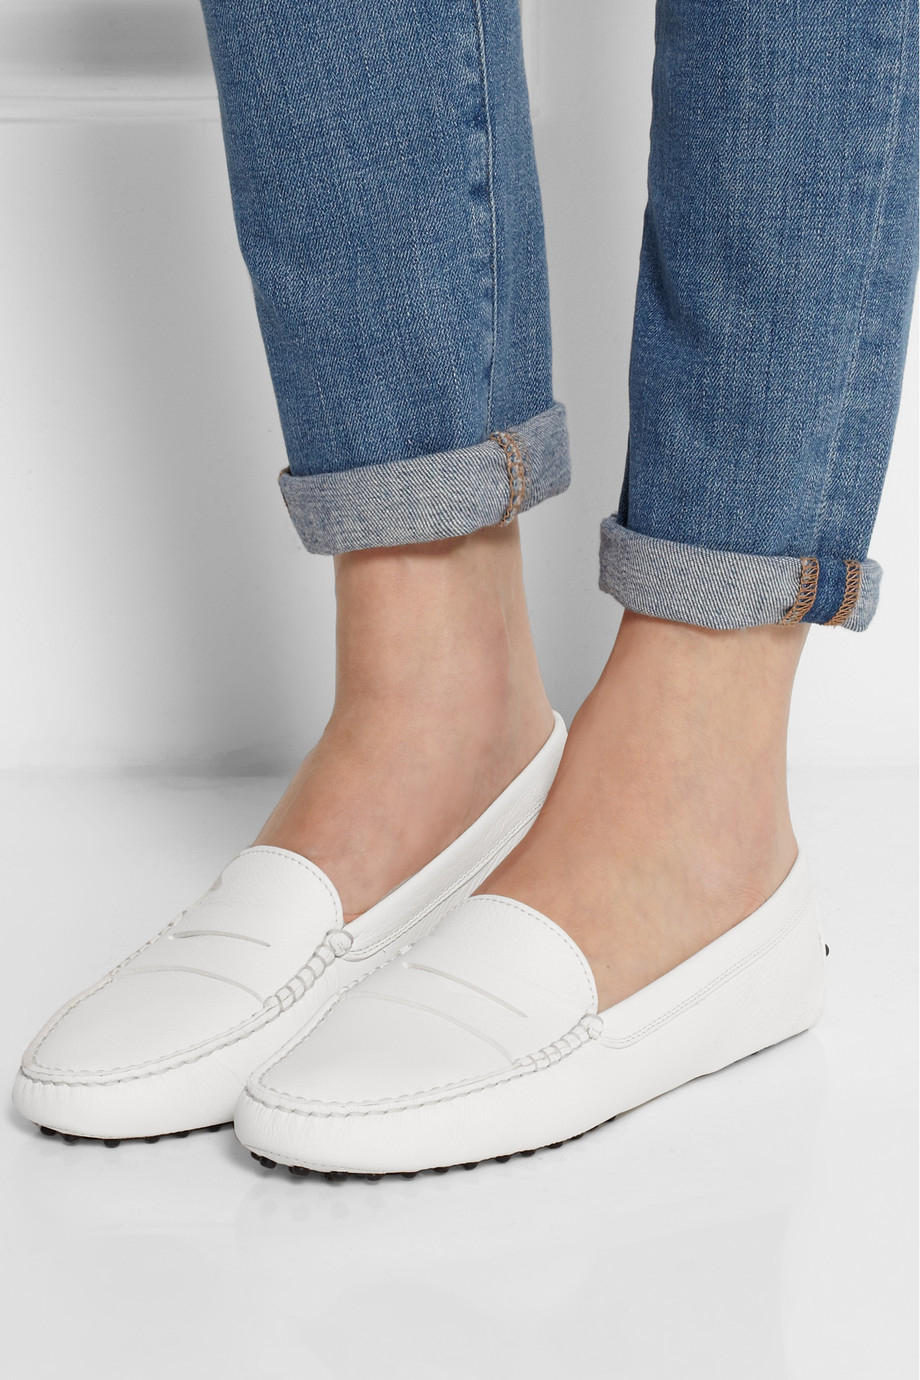 white tods loafers